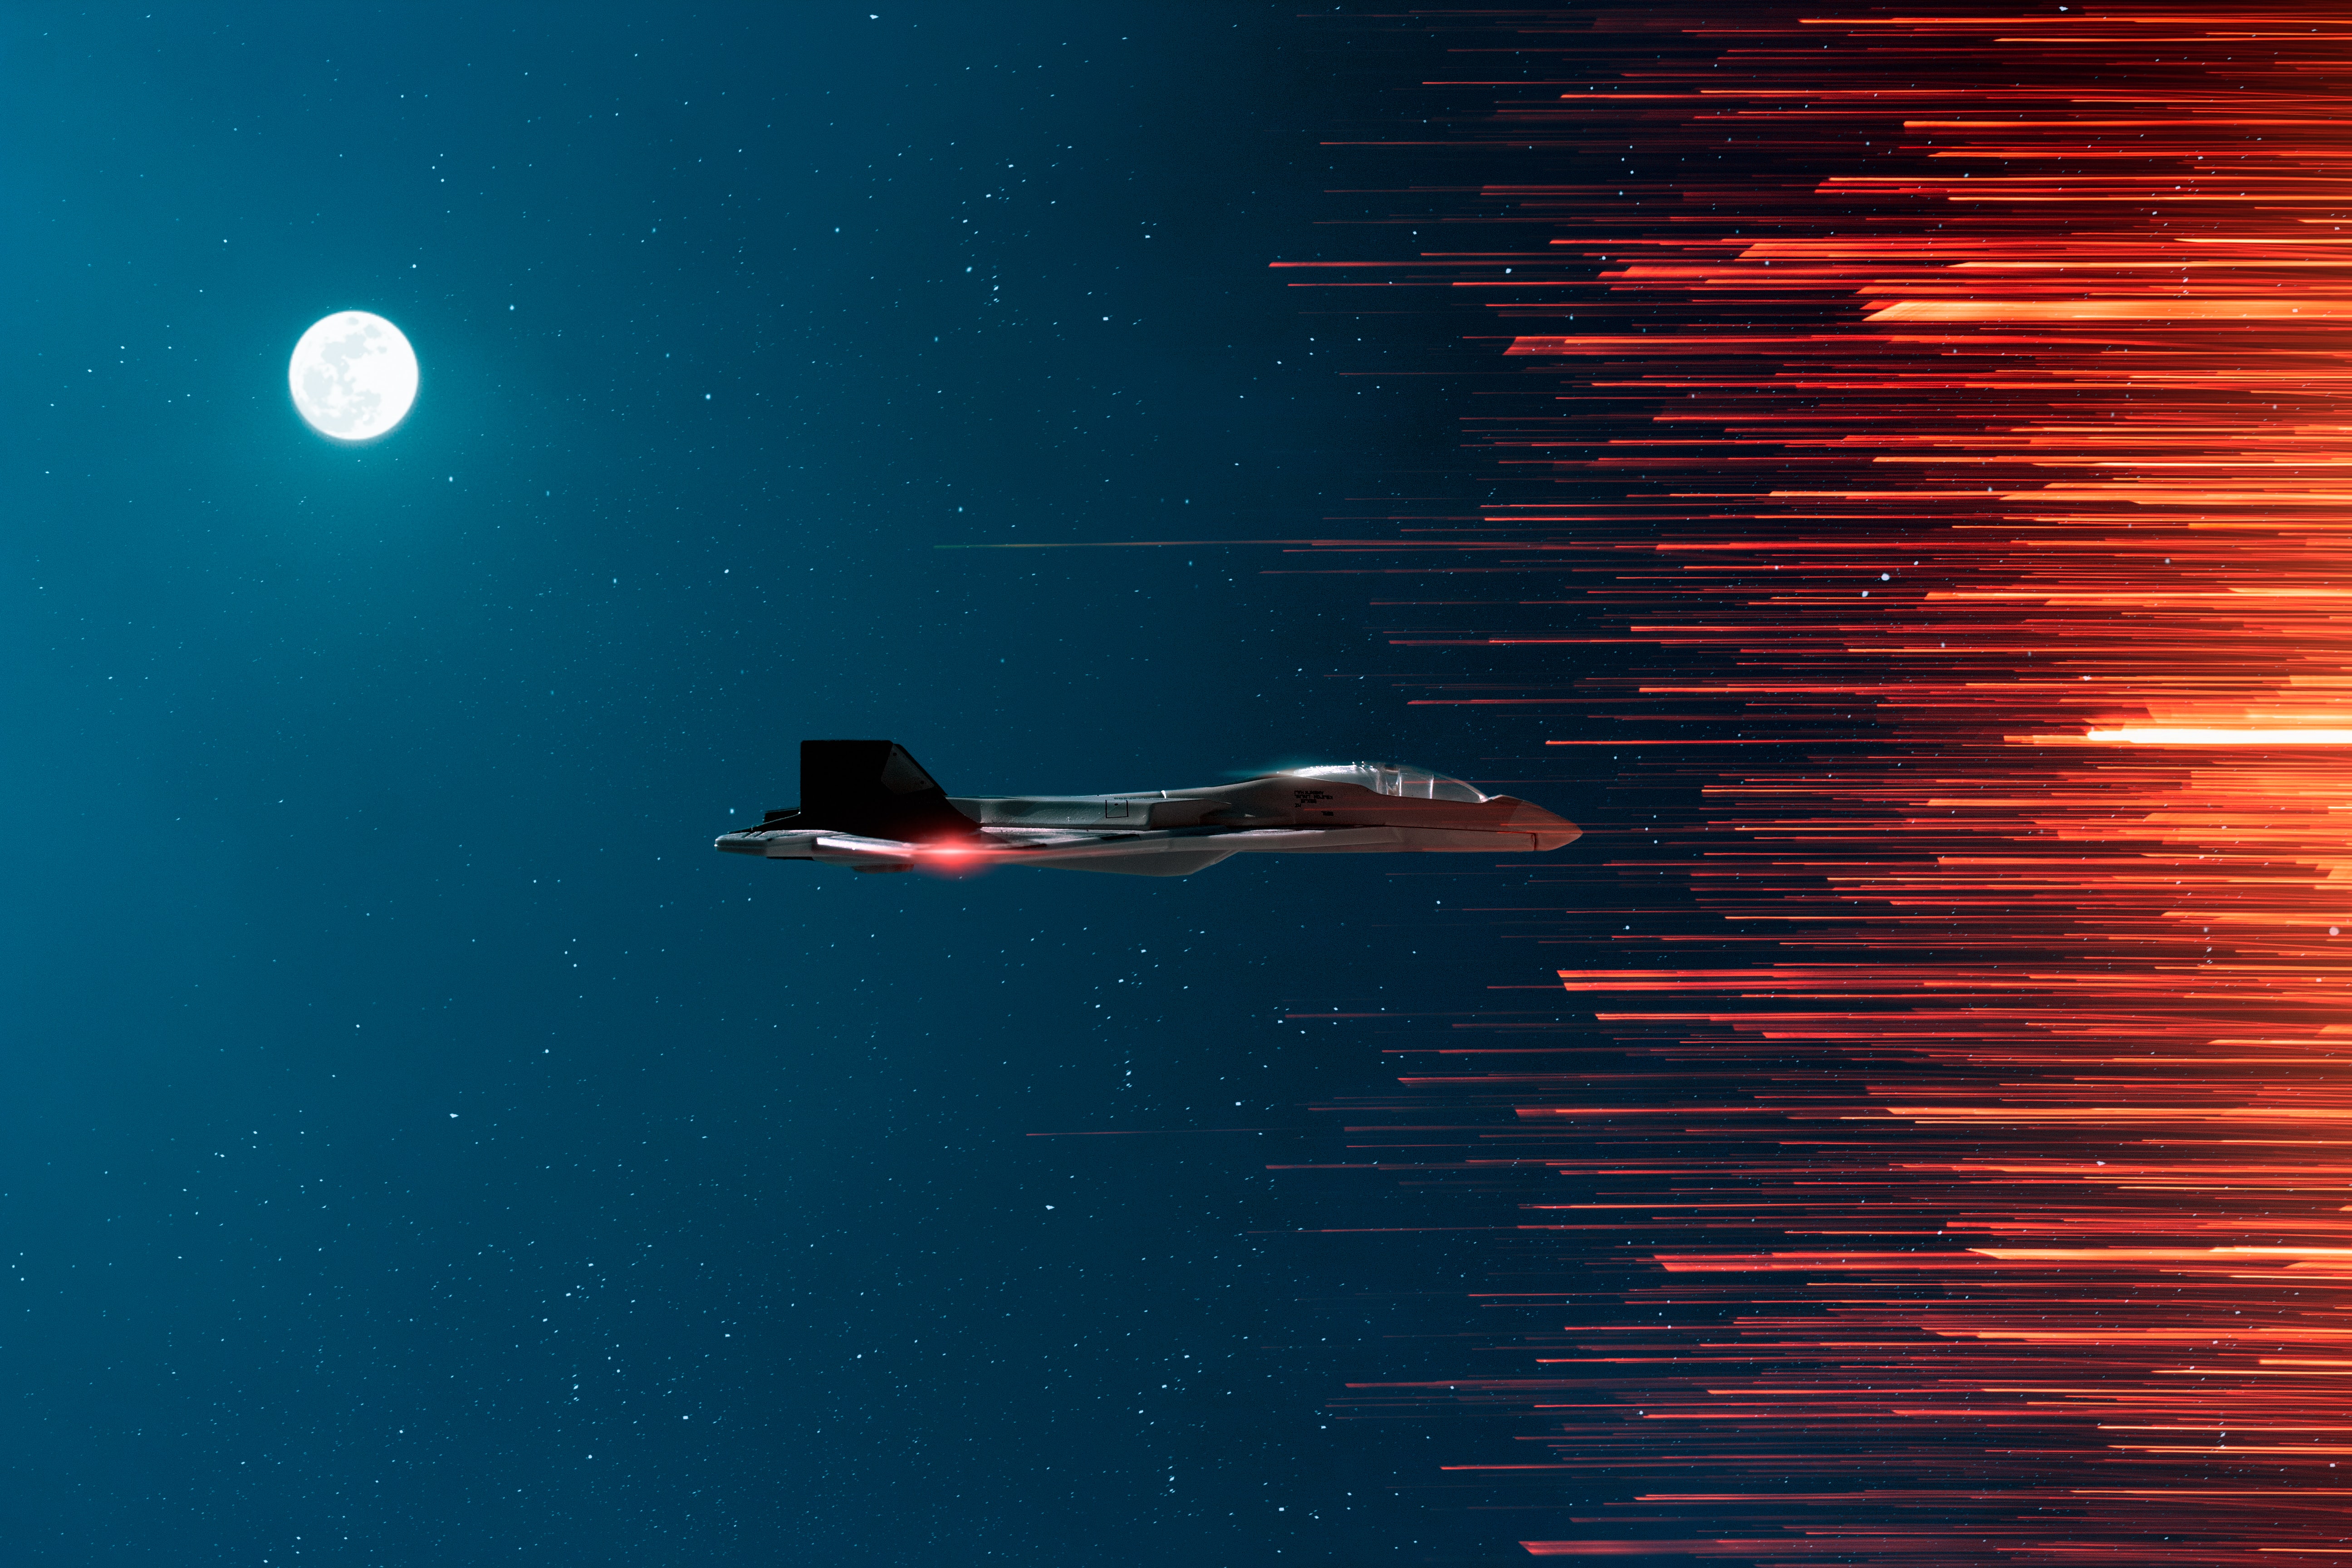 Fighter aircraft Wallpaper 4K, Full moon, Outer space, Orange Teal, Night time, Fantasy